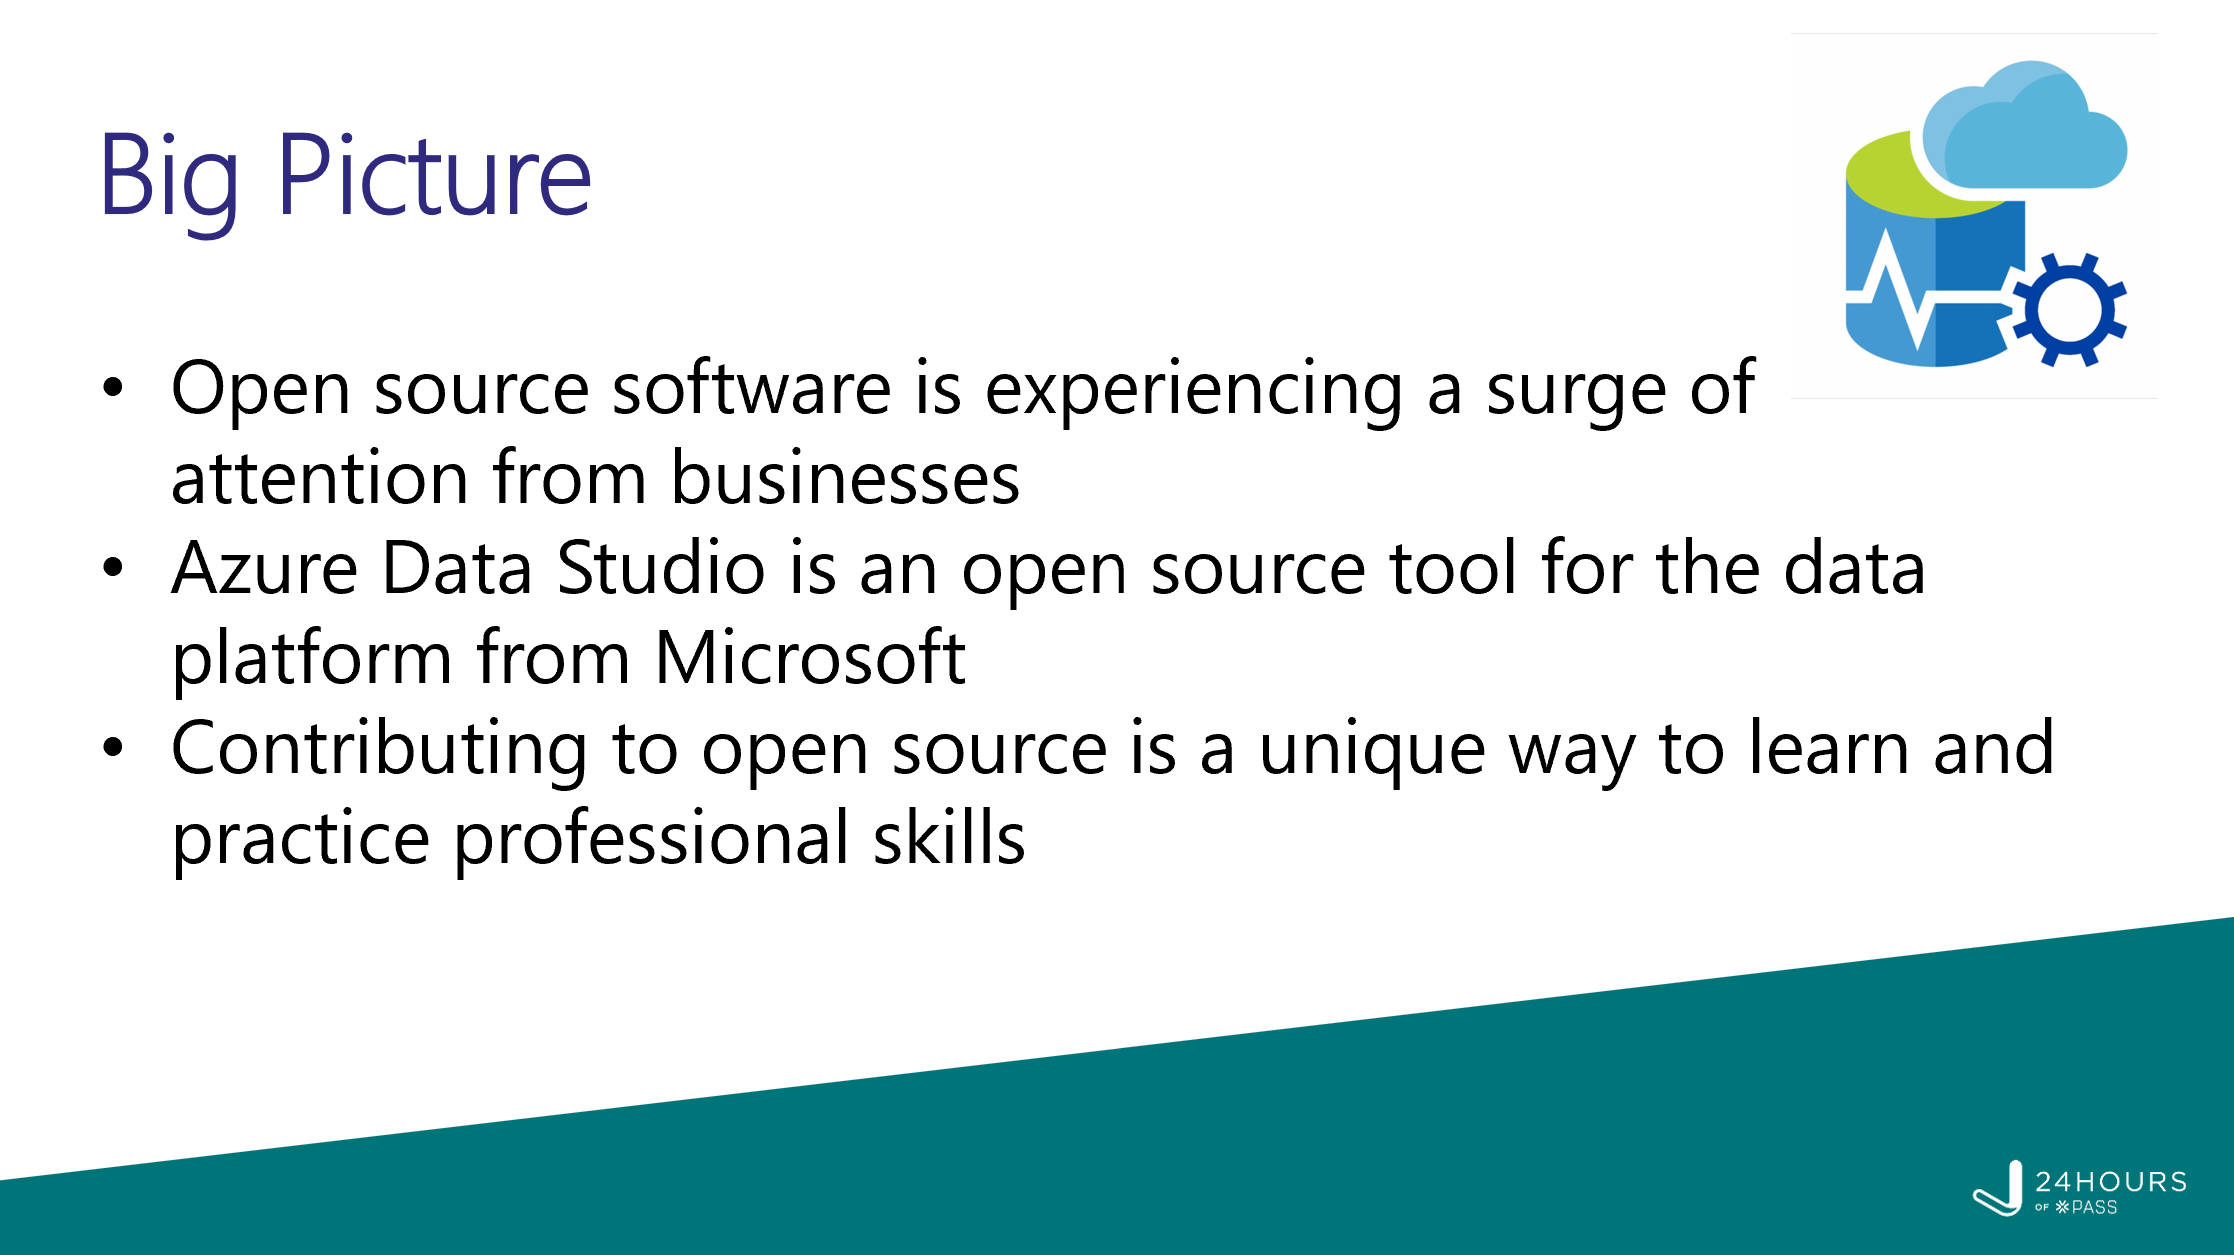 Big Picture
Open source software is experiencing a surge of attention from businesses
Azure Data Studio is an open source tool for the data platform from Microsoft
Contributing to open source is a unique way to learn and practice professional skills